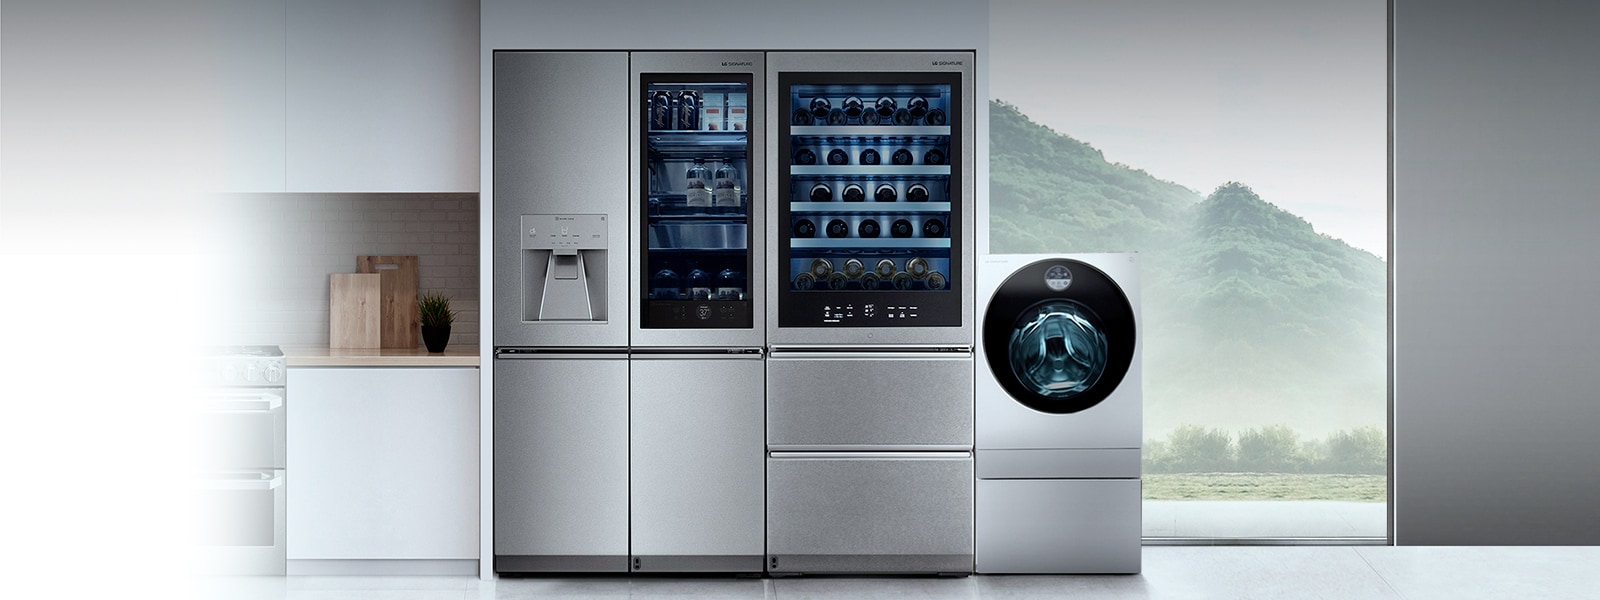 An image of a laundry room with LG Washing Machine and LG Dryer.